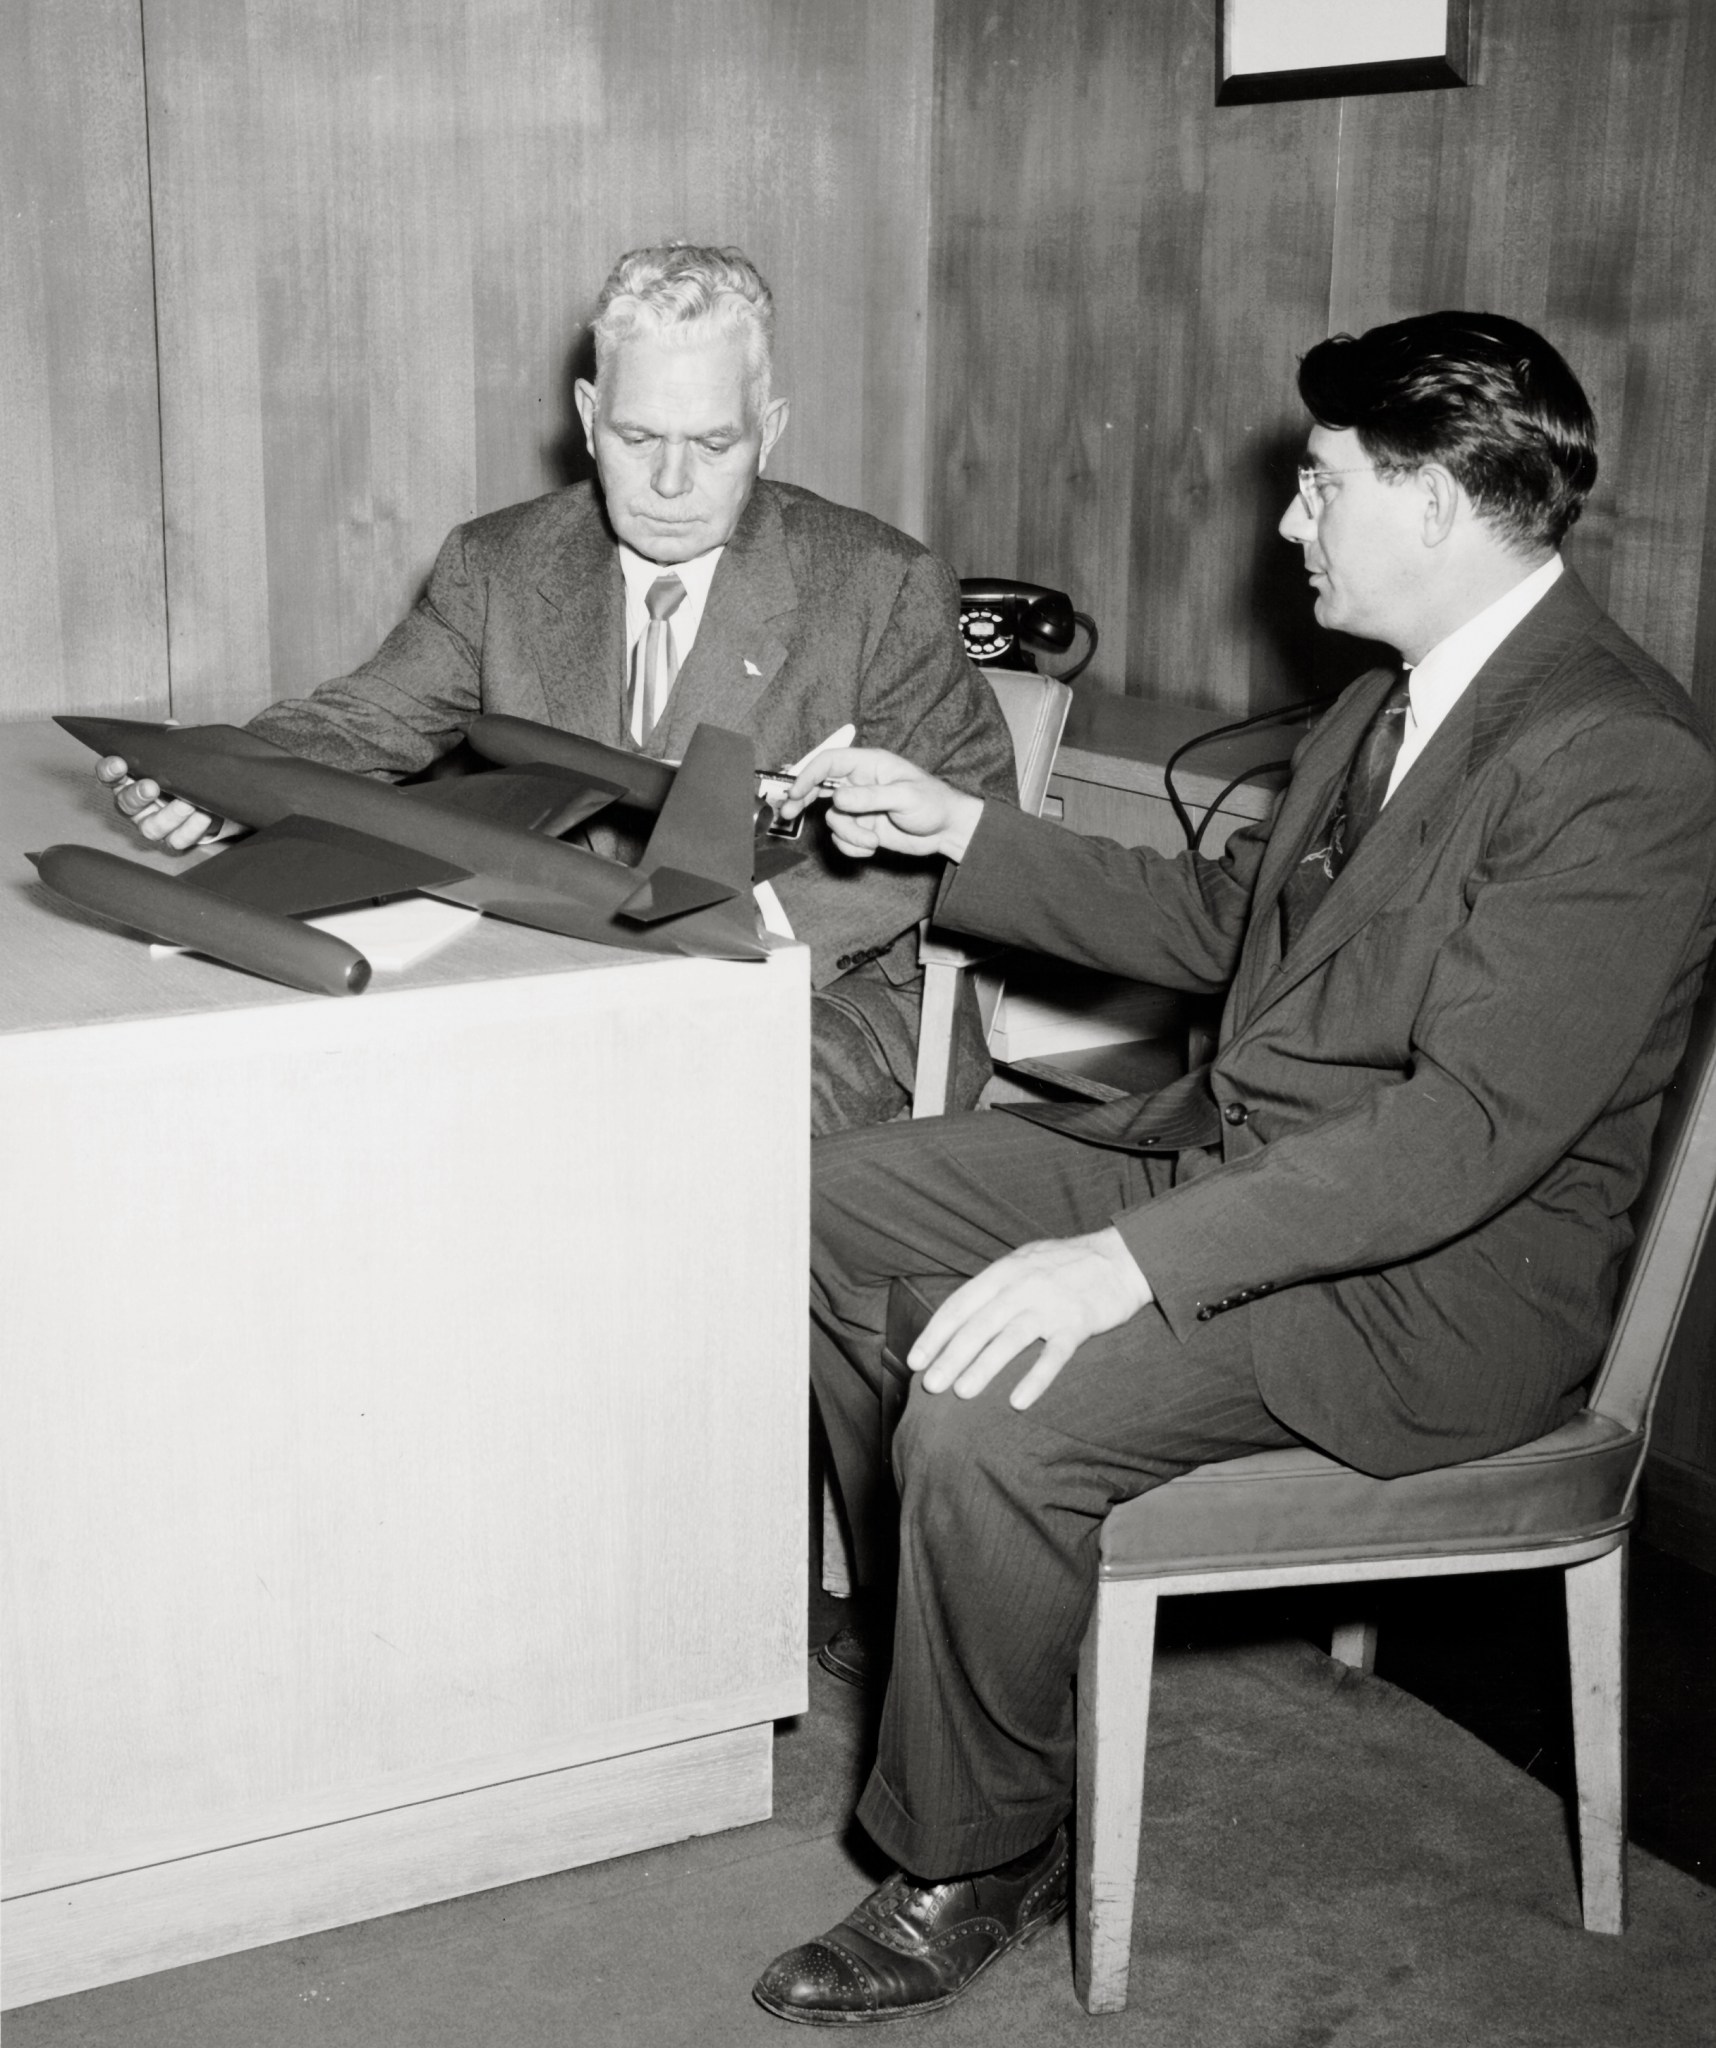 Two men at desk with aircraft model.